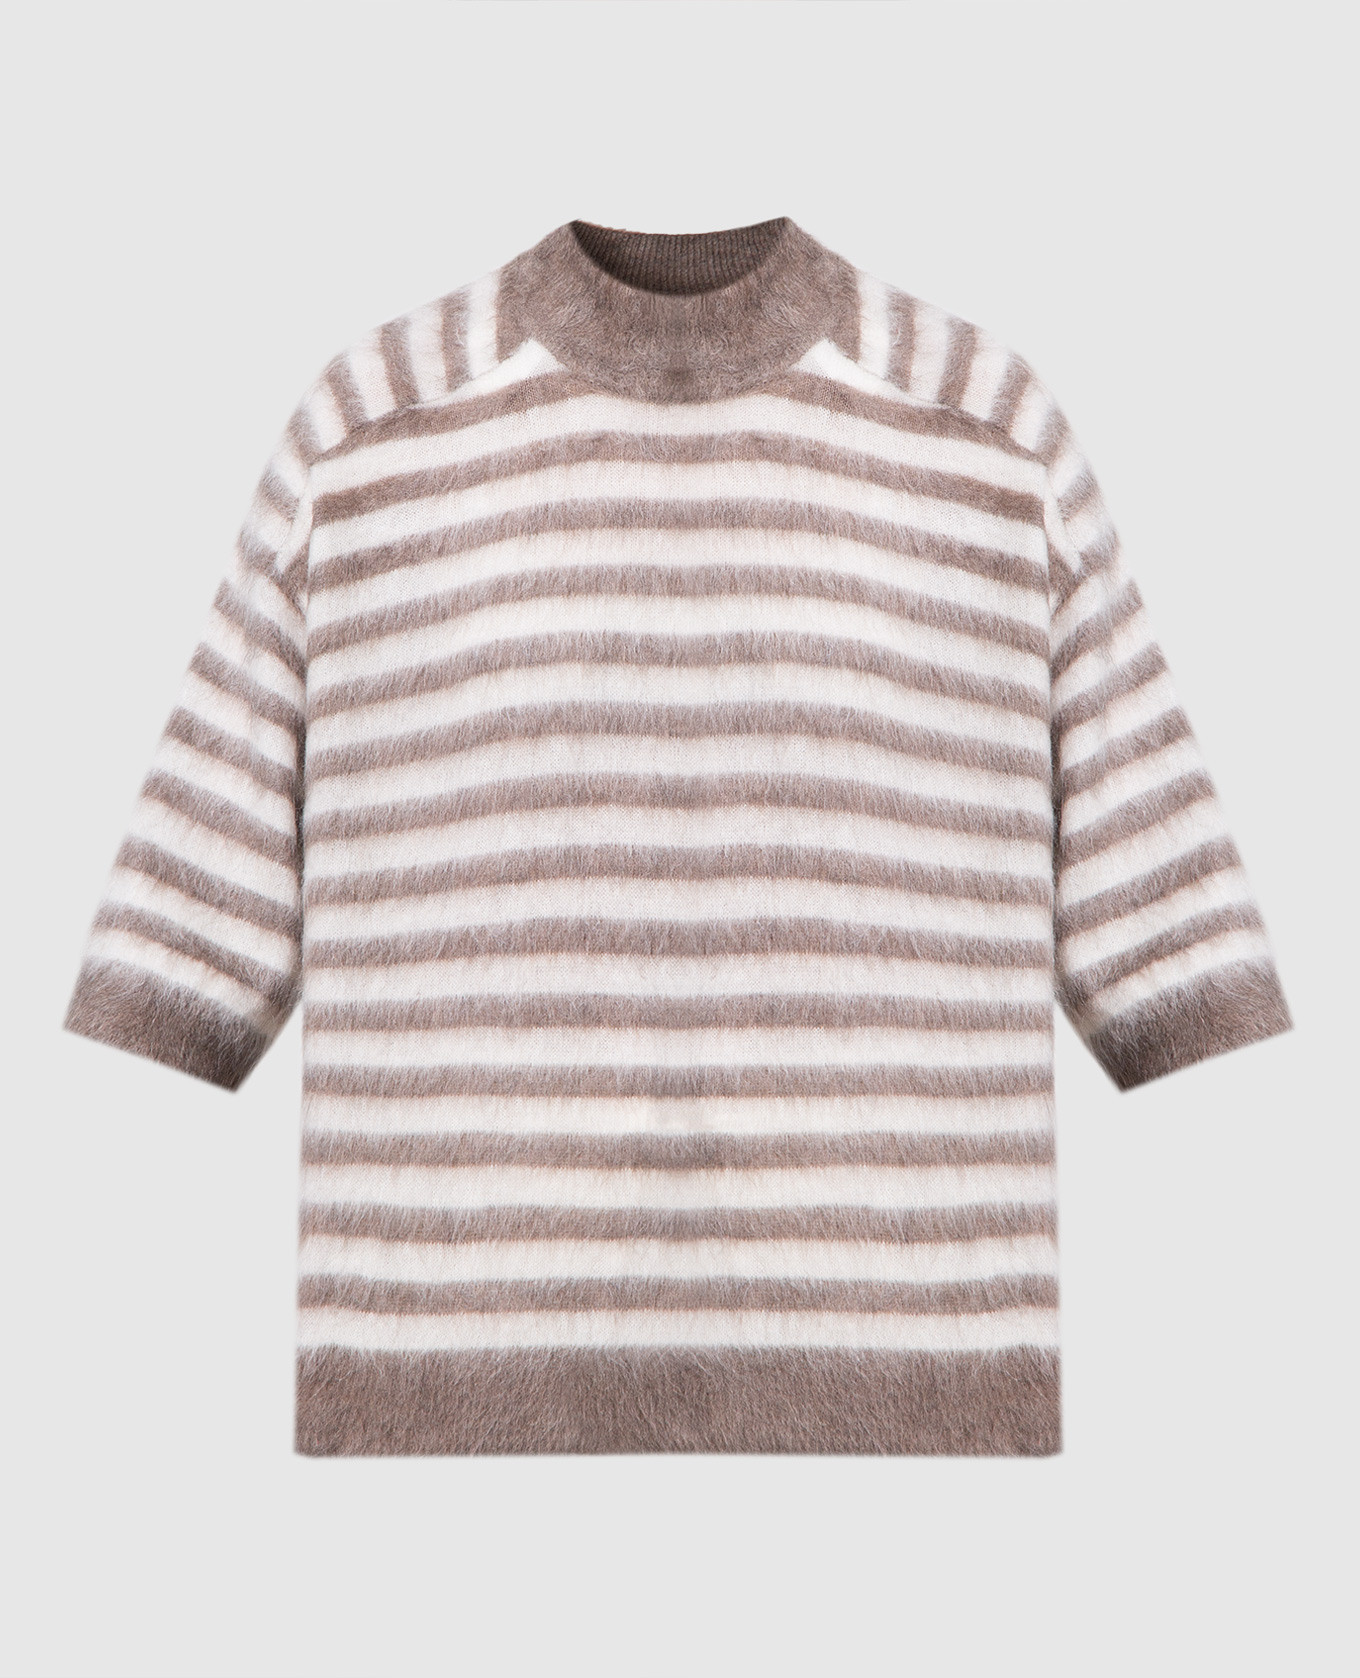 Brown striped jumper with monil chain